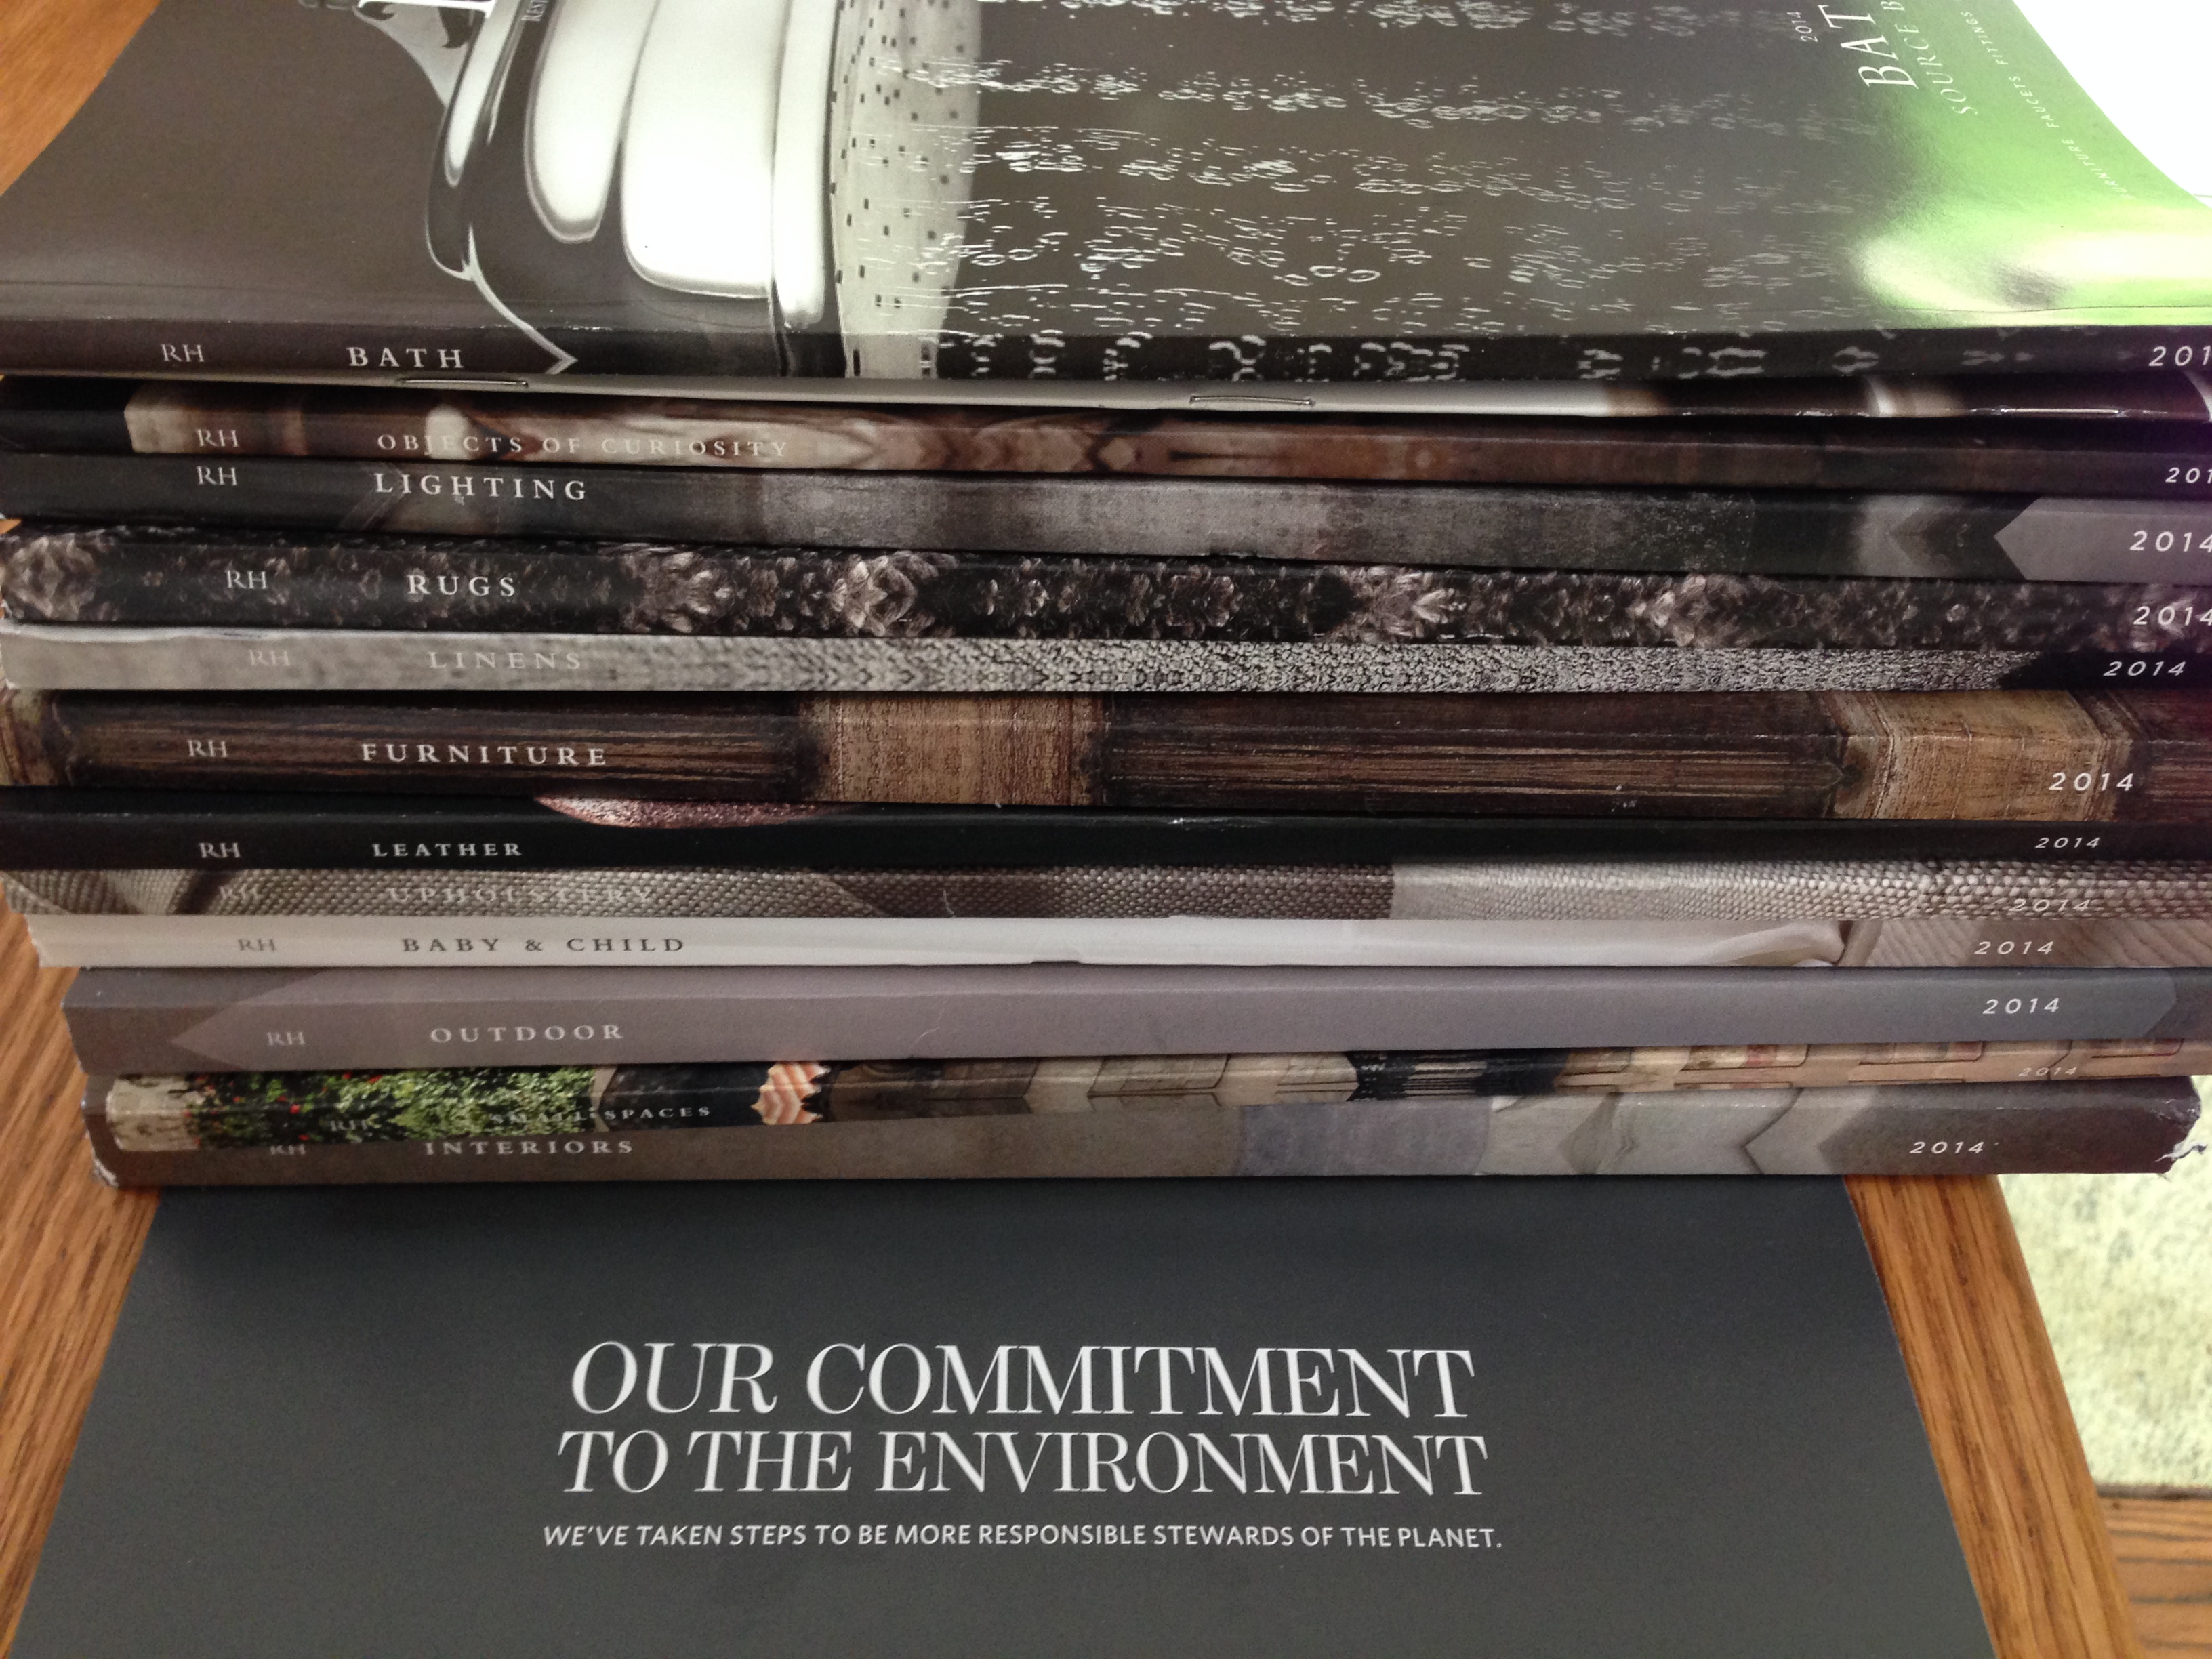 Restoration Hardware sent 16 lb of paper catalogs to my address, even though I'm not subscribed to their mailing list. And they have the gall to enclose a sheet listing their 'commitment to the environment'. sick. 